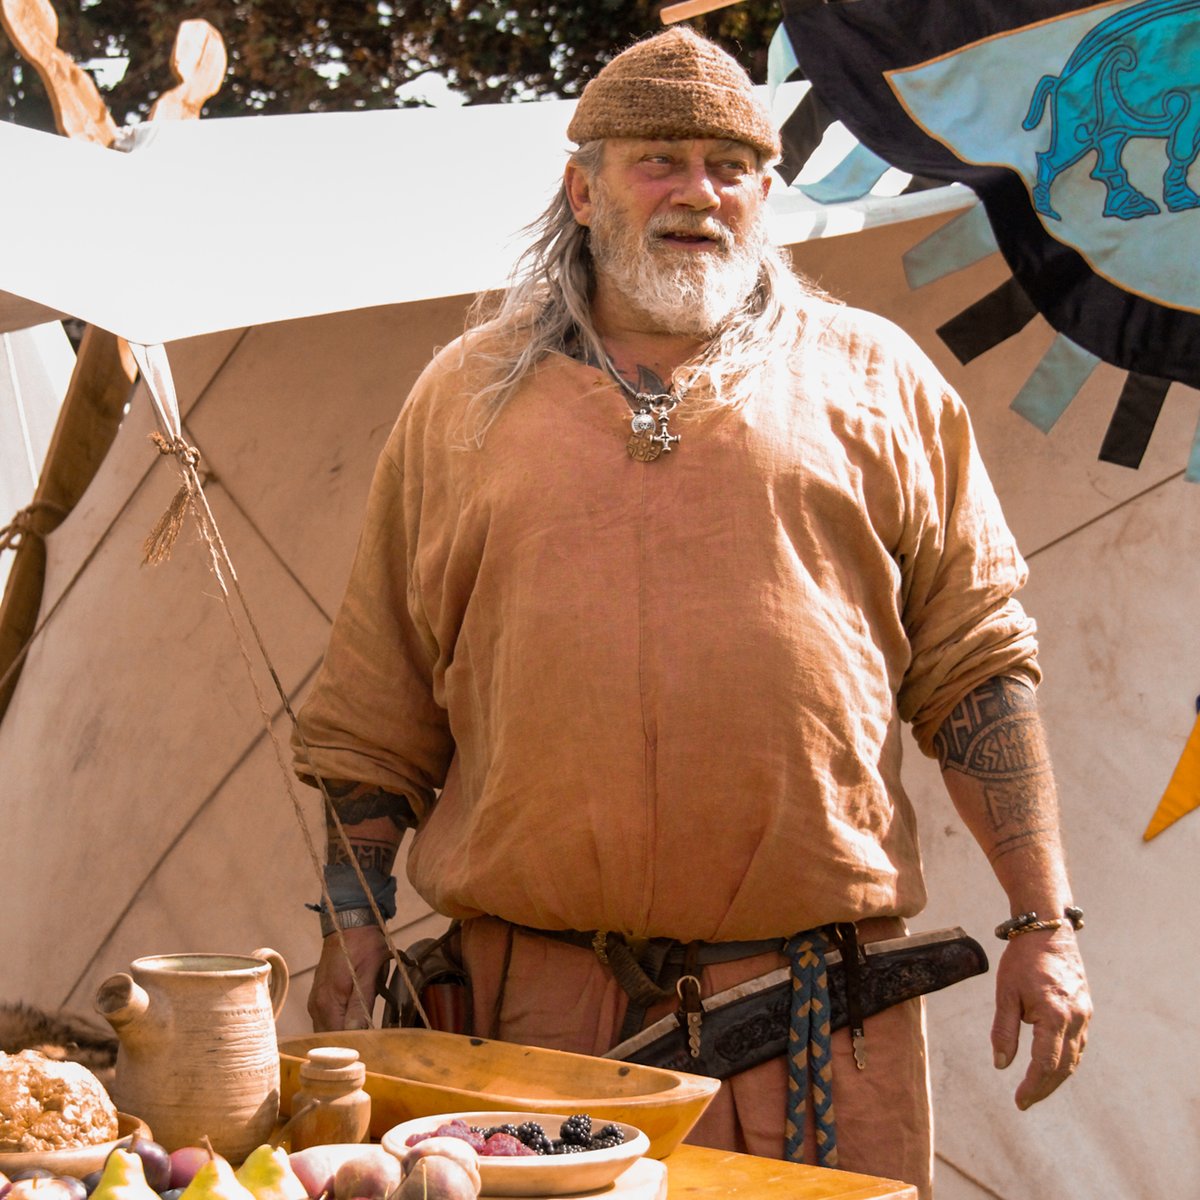 🔥 Experience Viking life up-close! Join us for an unforgettable journey through our authentic Viking tented village at the Heysham Viking Festival. Perfect for history buffs of all ages! 🏕️ Heysham Viking Festival 📅 July 20 - 21, 2024 🎟️ Free entry!